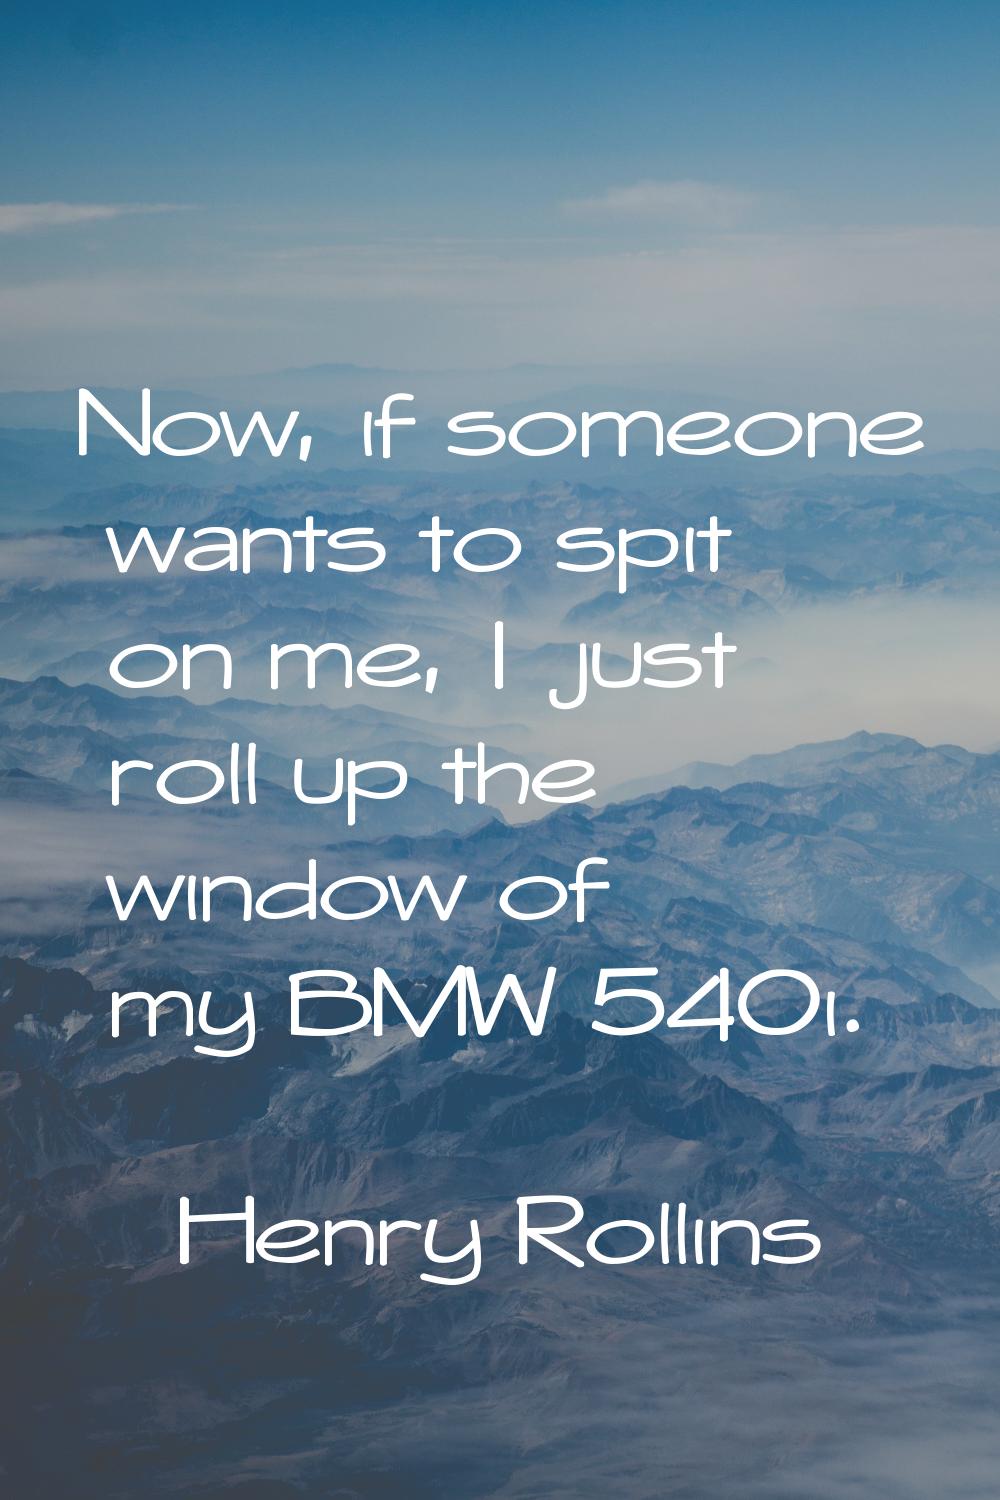 Now, if someone wants to spit on me, I just roll up the window of my BMW 540i.